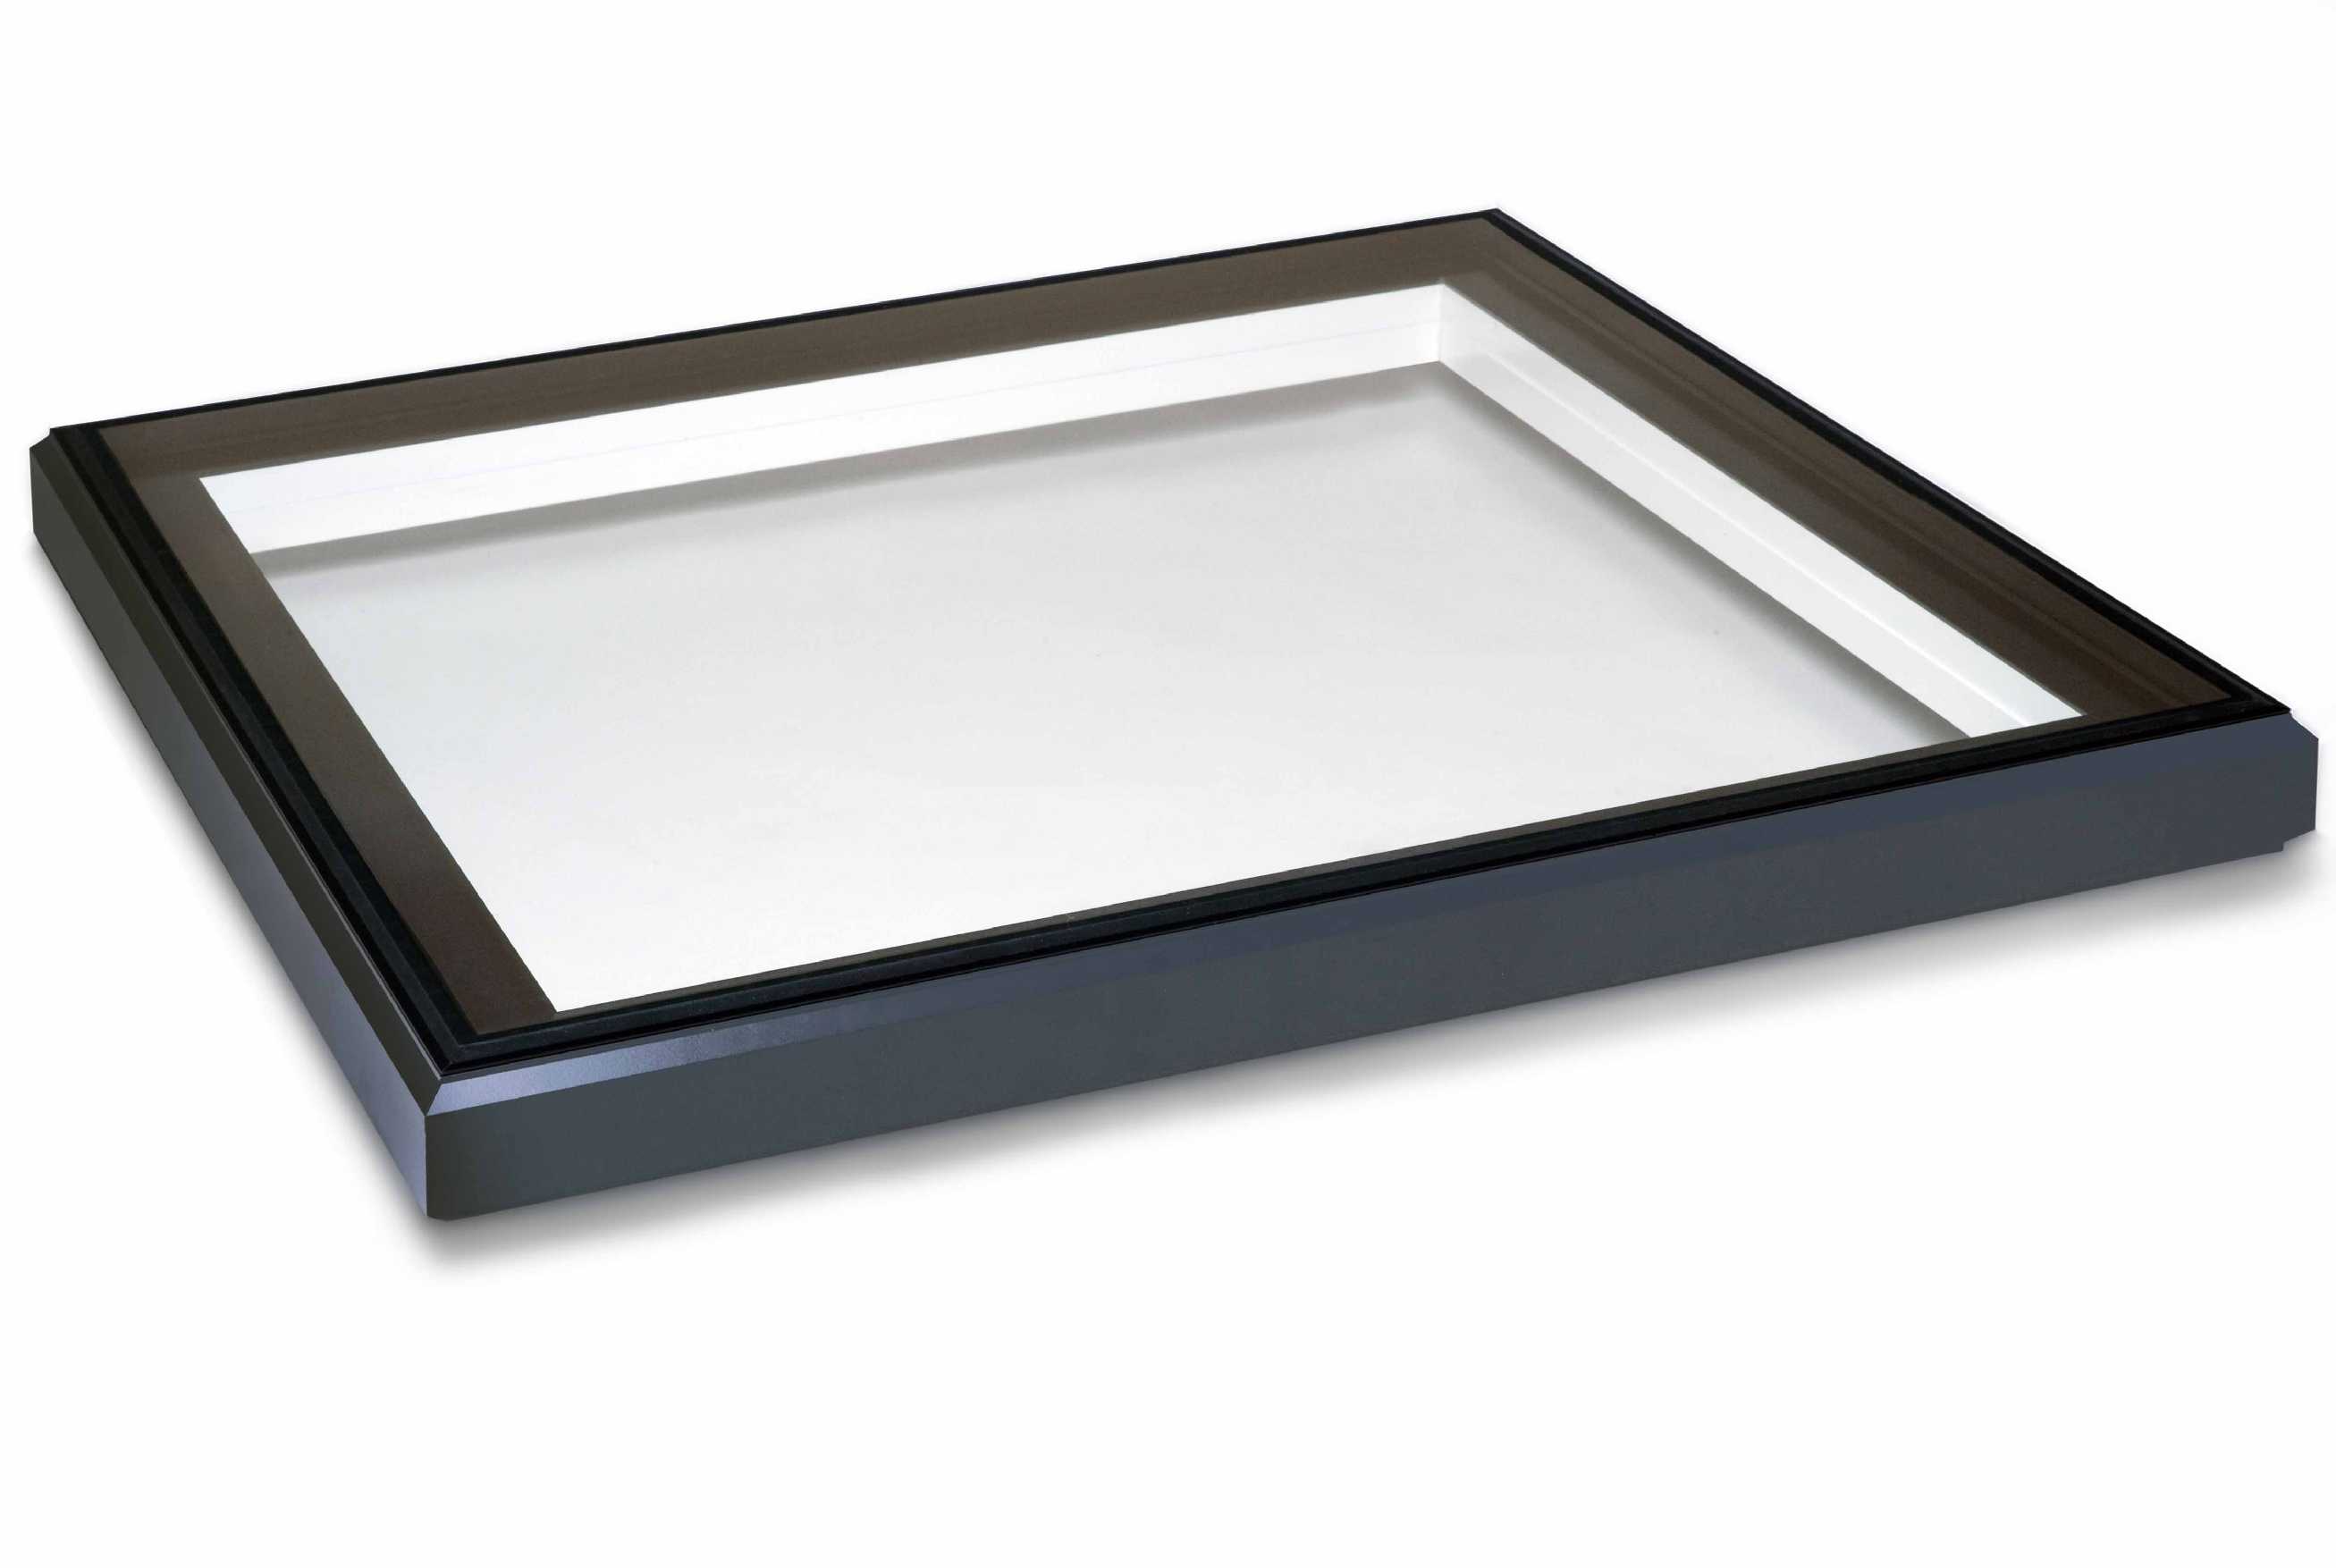 Buy EcoGard Flat Roof light, Triple Glazed, Electric Opening, 1,000mm x 1,000mm online today